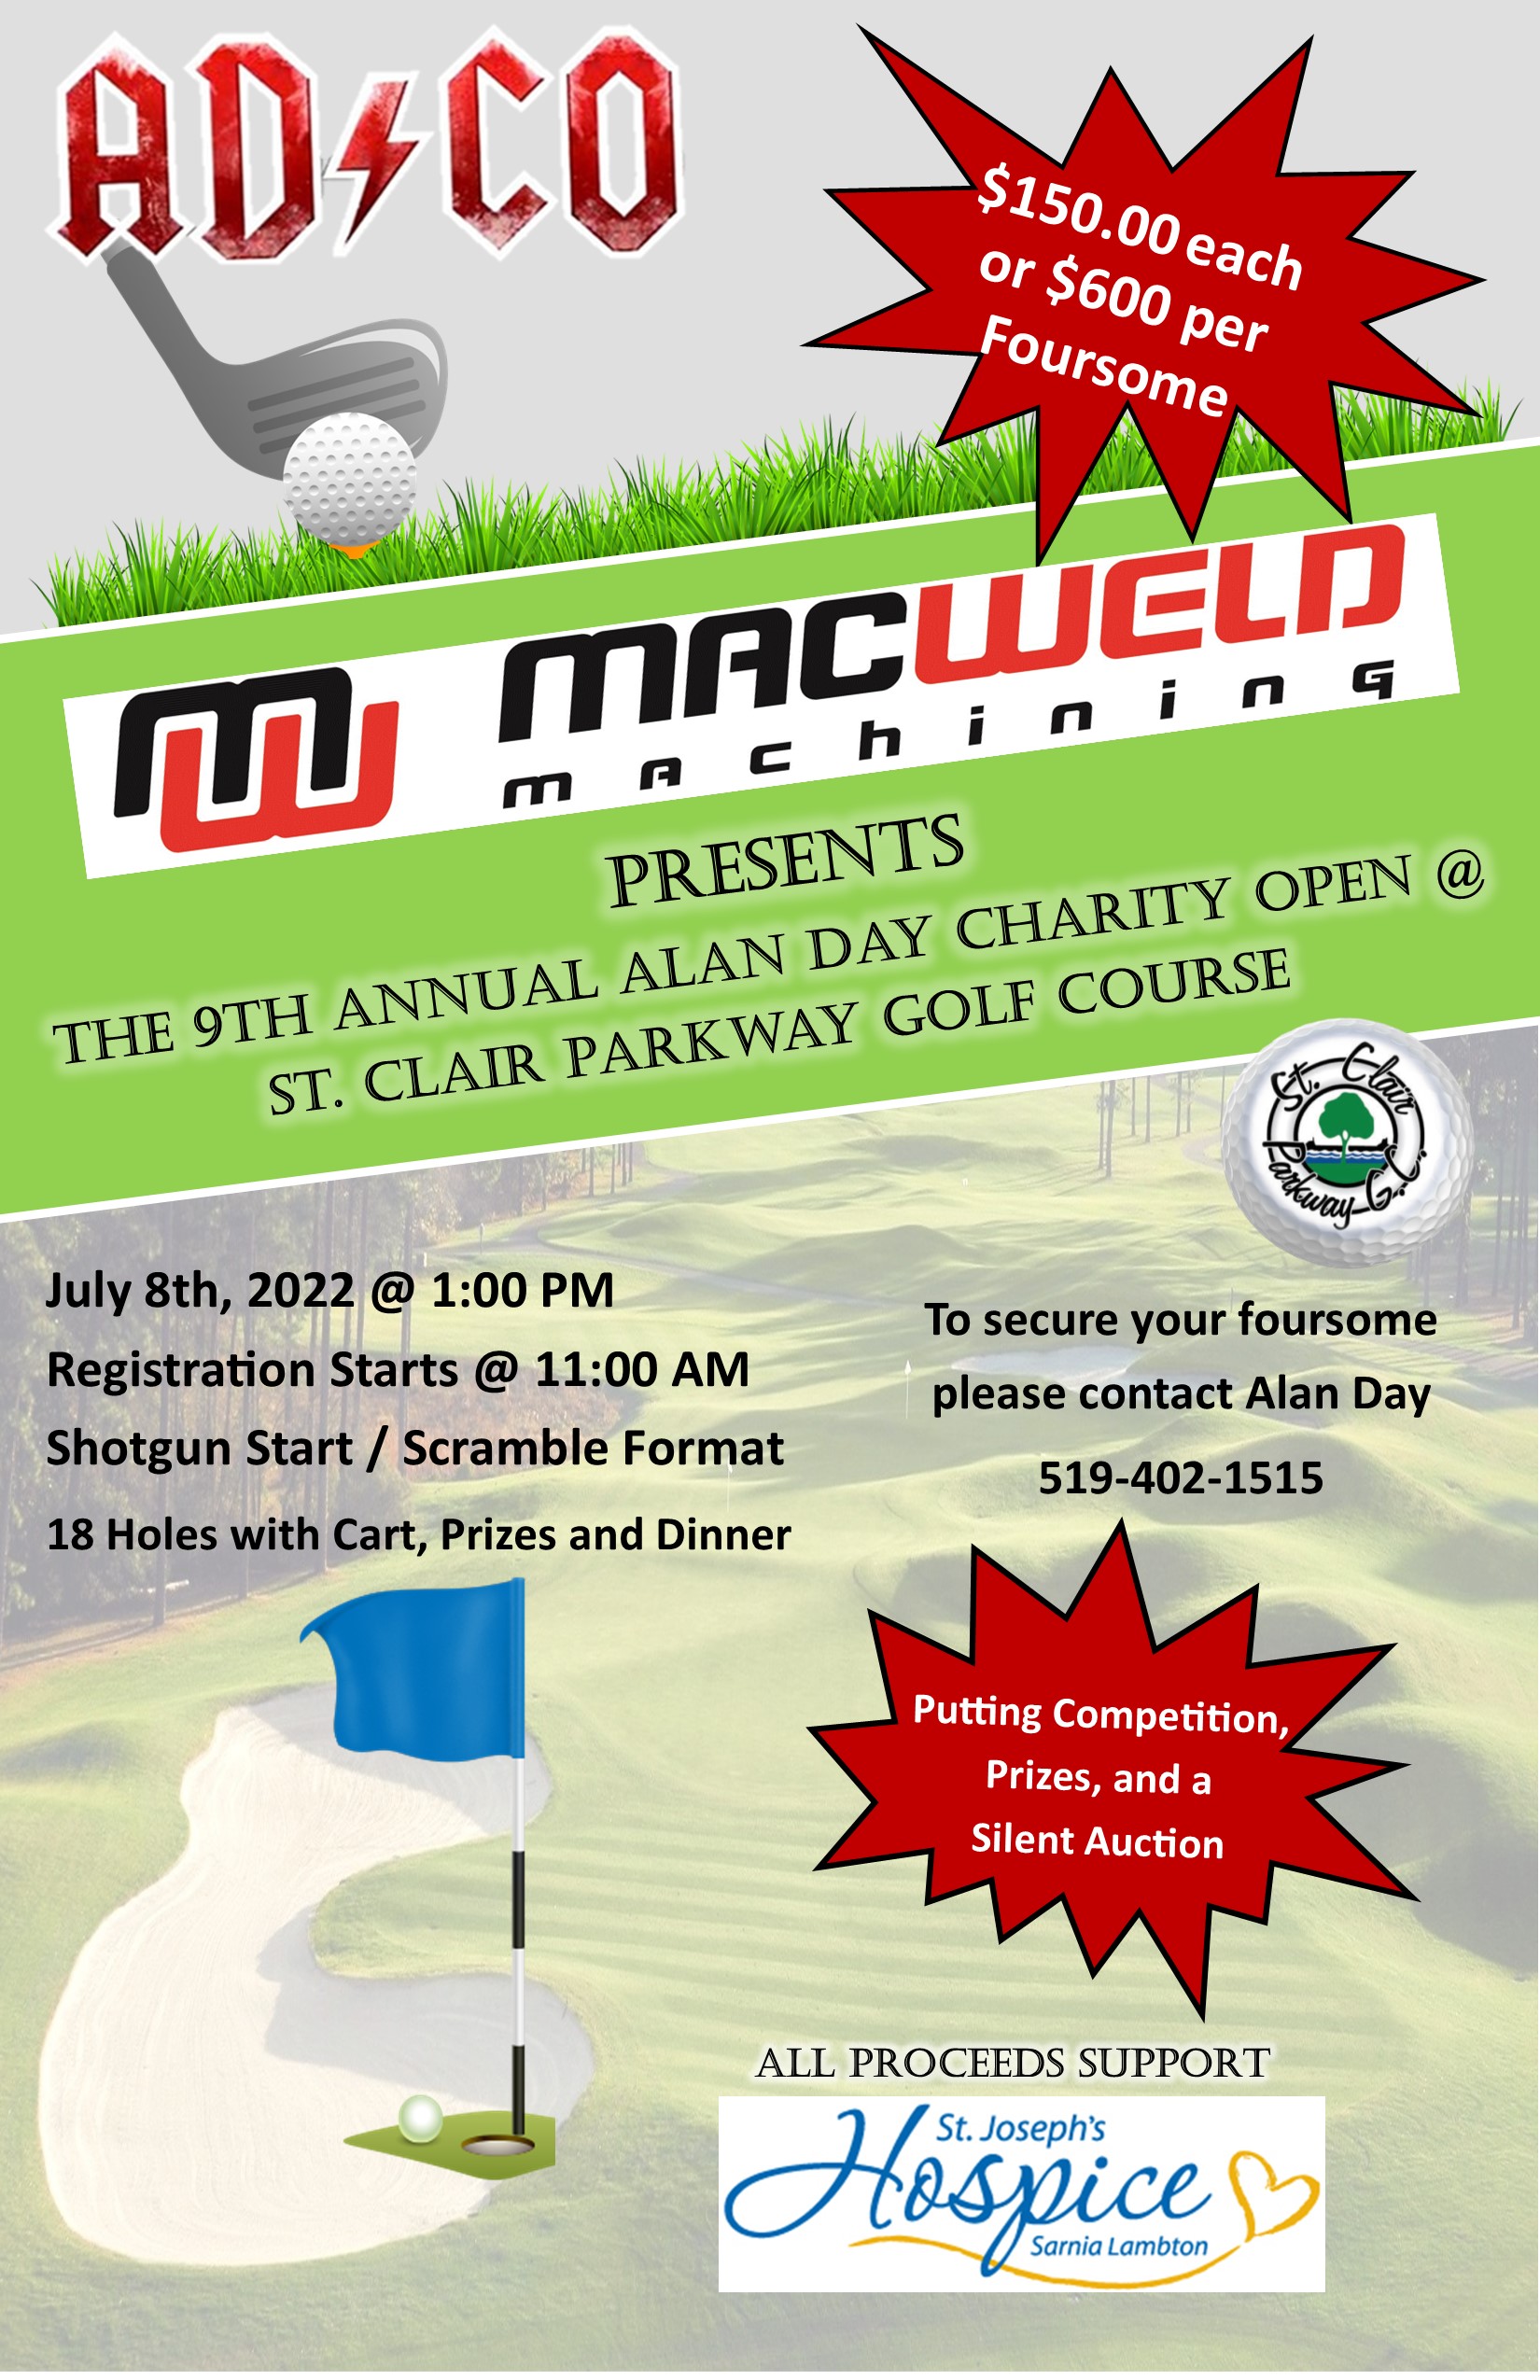 Alan Day Charity Open